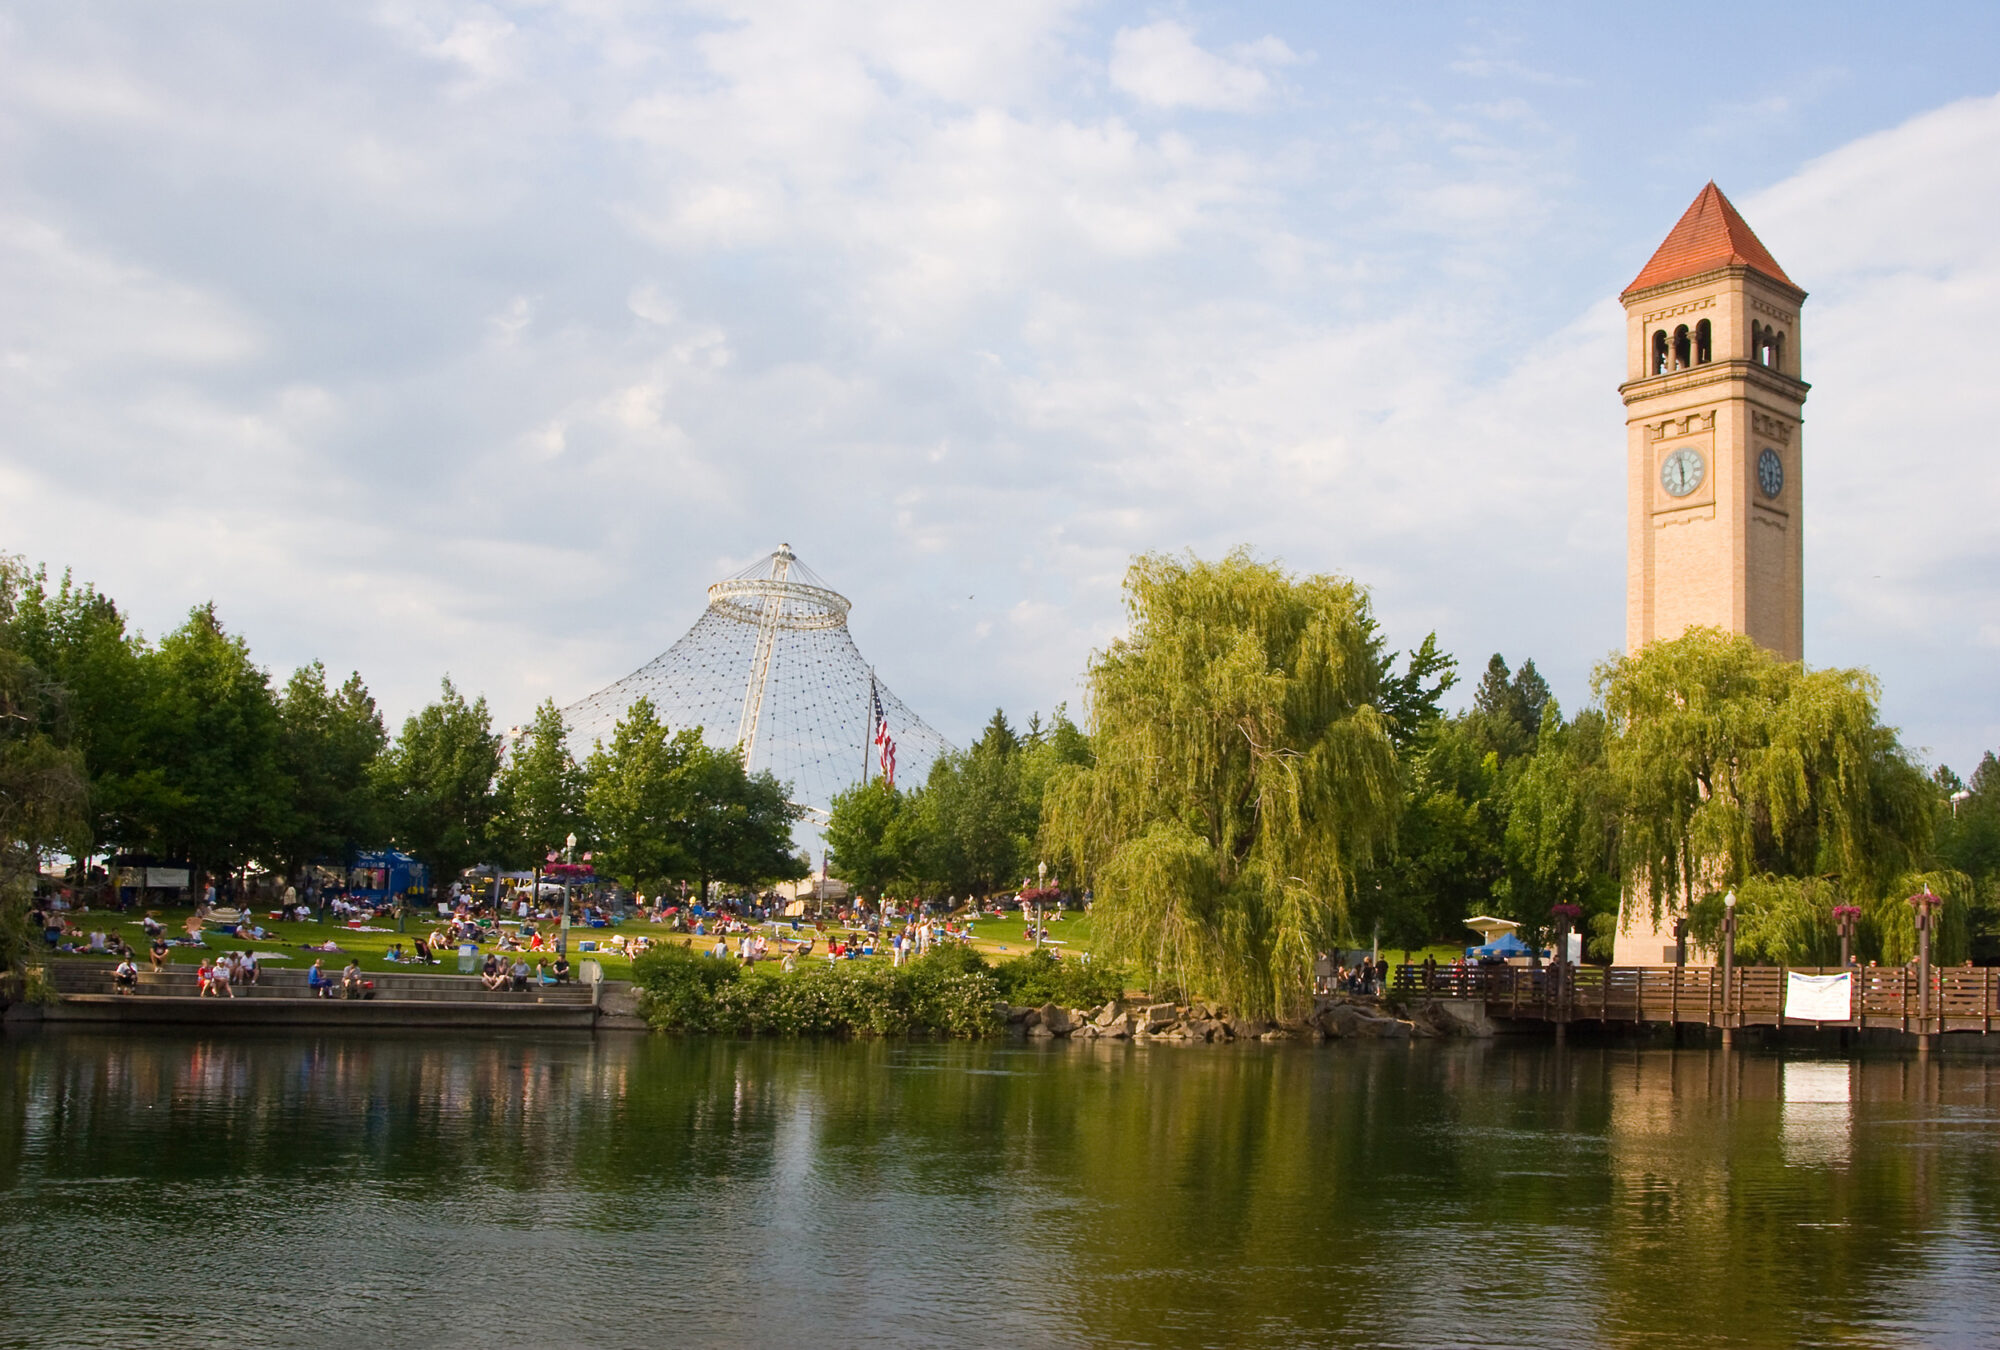 Downtown Spokane Clocktower and Pavilion during event